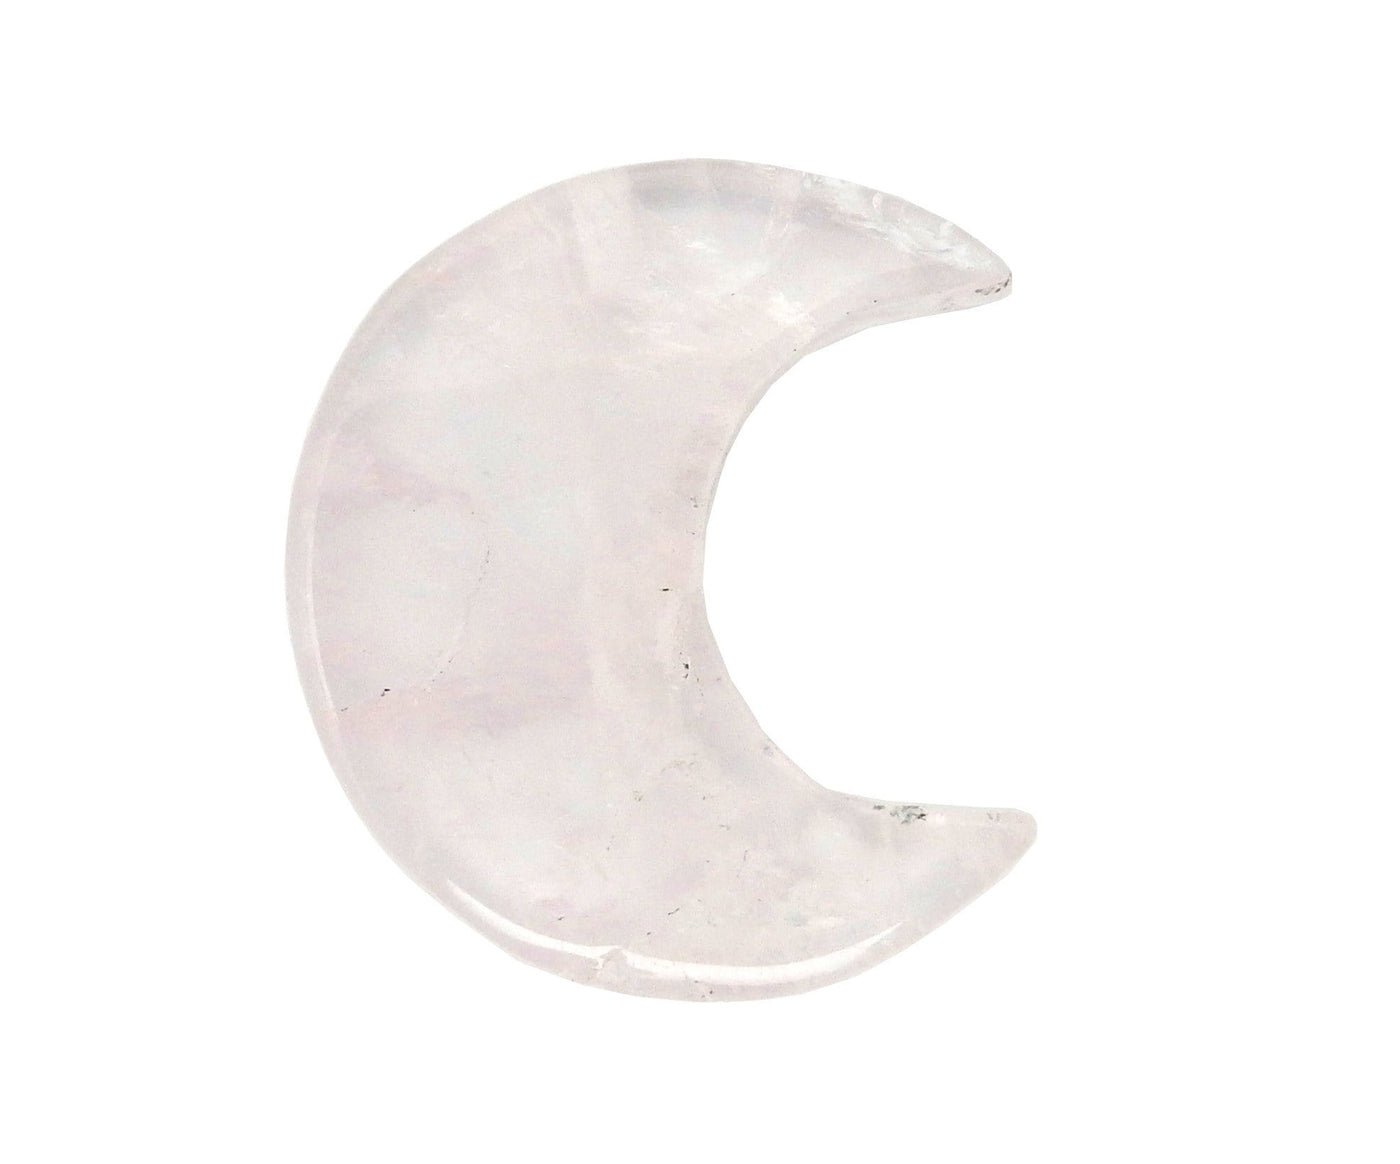 Rose Quartz Half Crescent Moon - Drilled displayed on a white surface.